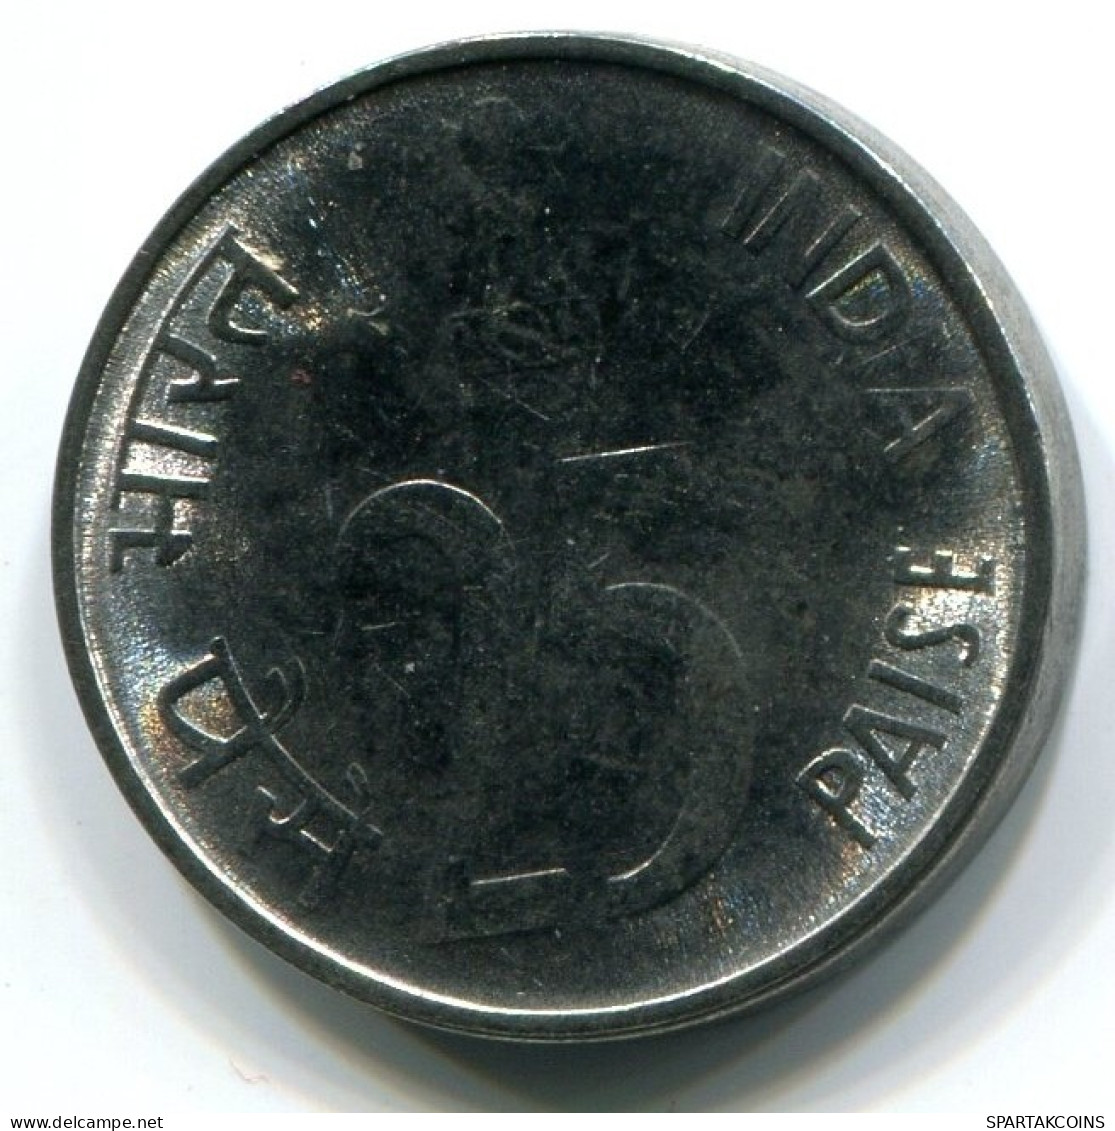 25 PAISE 1999 INDE INDIA UNC Pièce #W11394.F.A - India